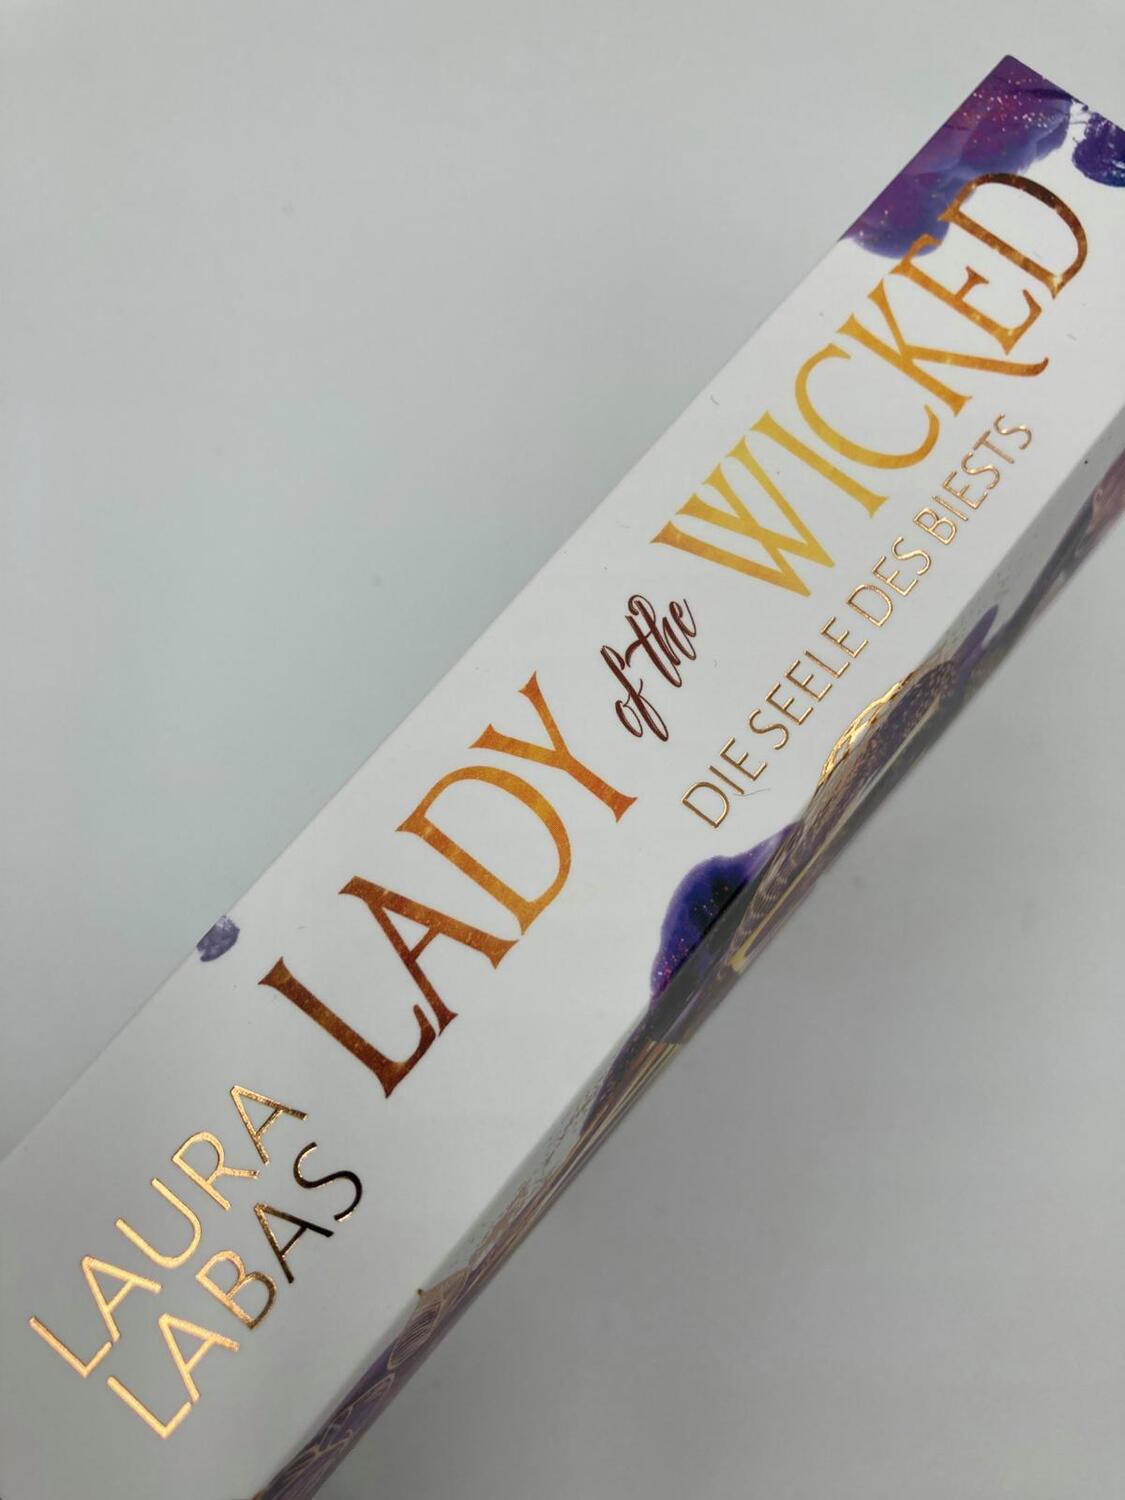 Bild: 9783492706421 | Lady of the Wicked | Laura Labas | Taschenbuch | Lady of the Wicked